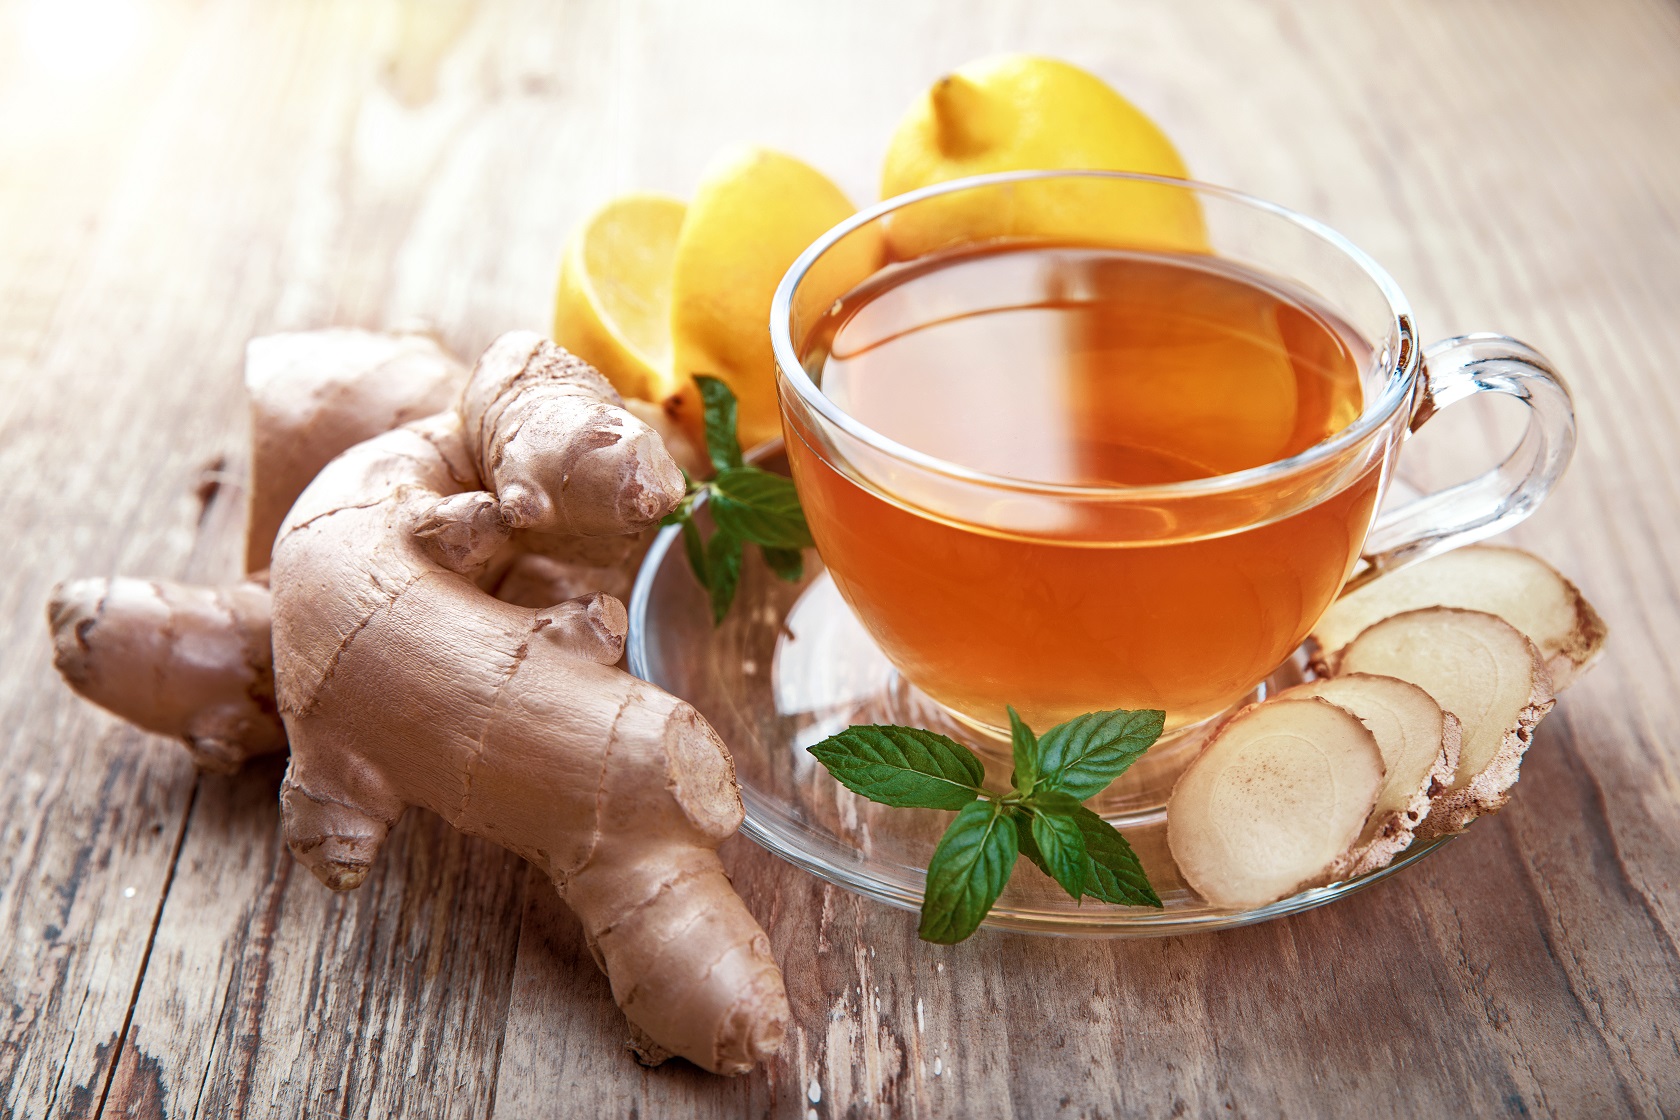 Ginger tea - This is how the tea stays healthy